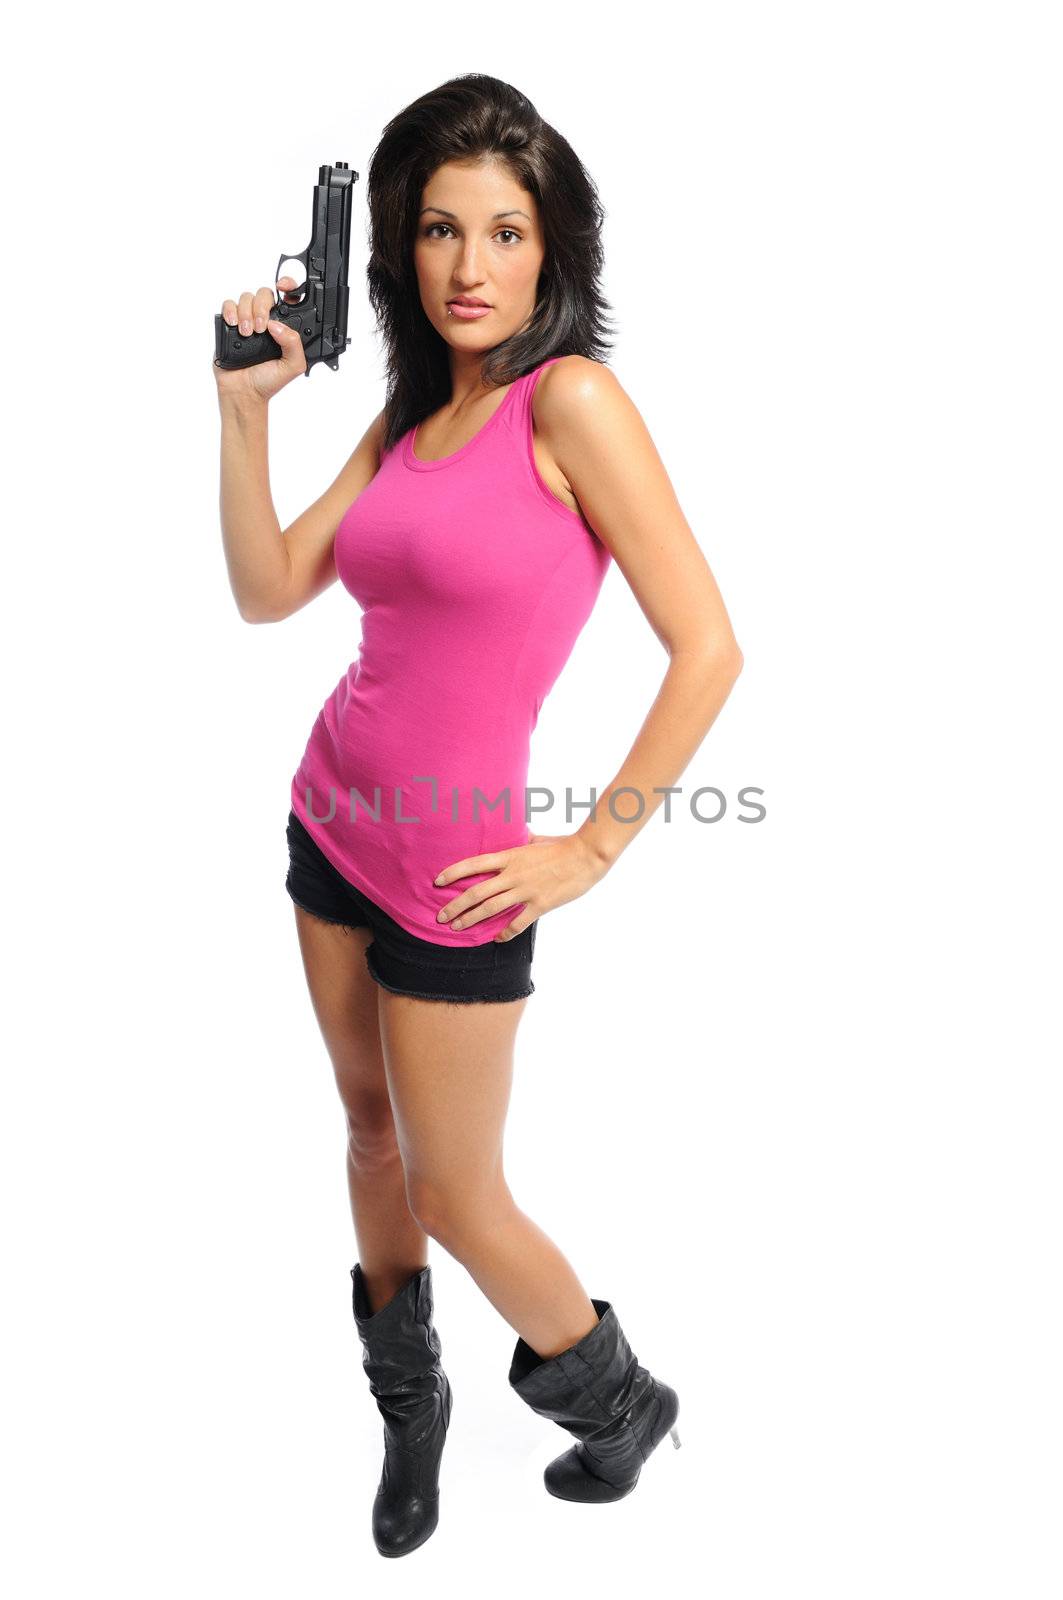 attractive young hispanic woman on a white back ground holding a pistol